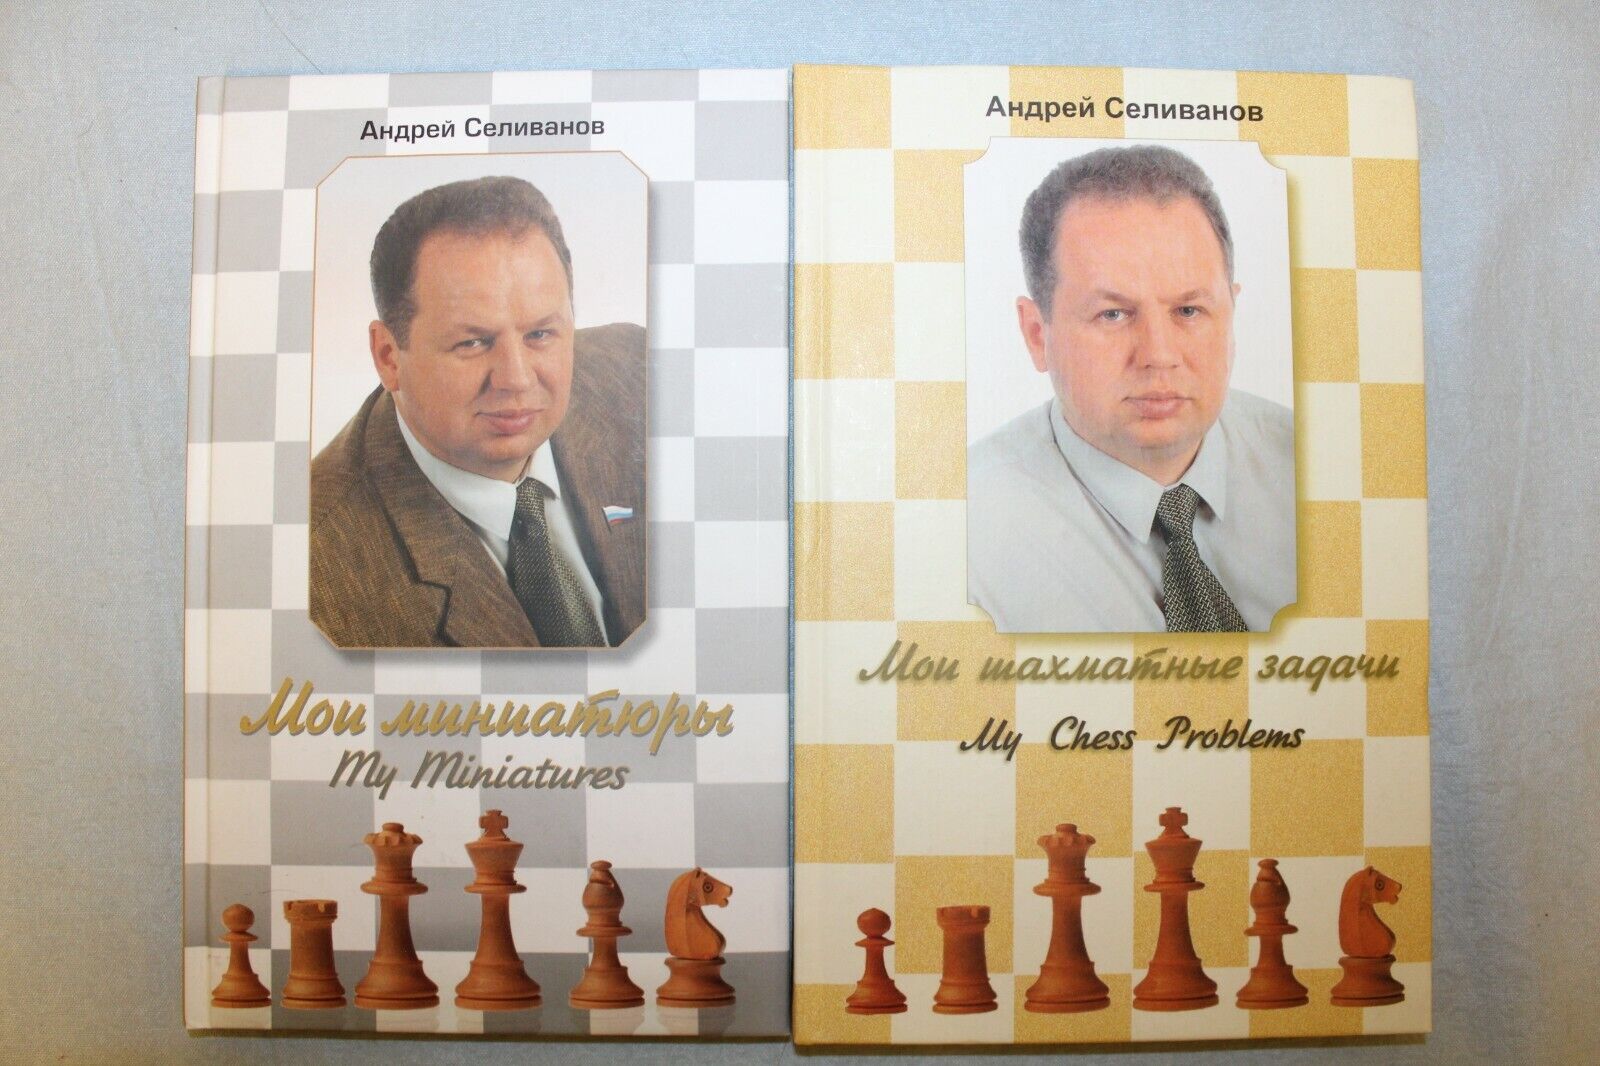 11626.Set 2 Russian Chess Books: Selivanov.My Miniatures,My Chess Problems.Composition